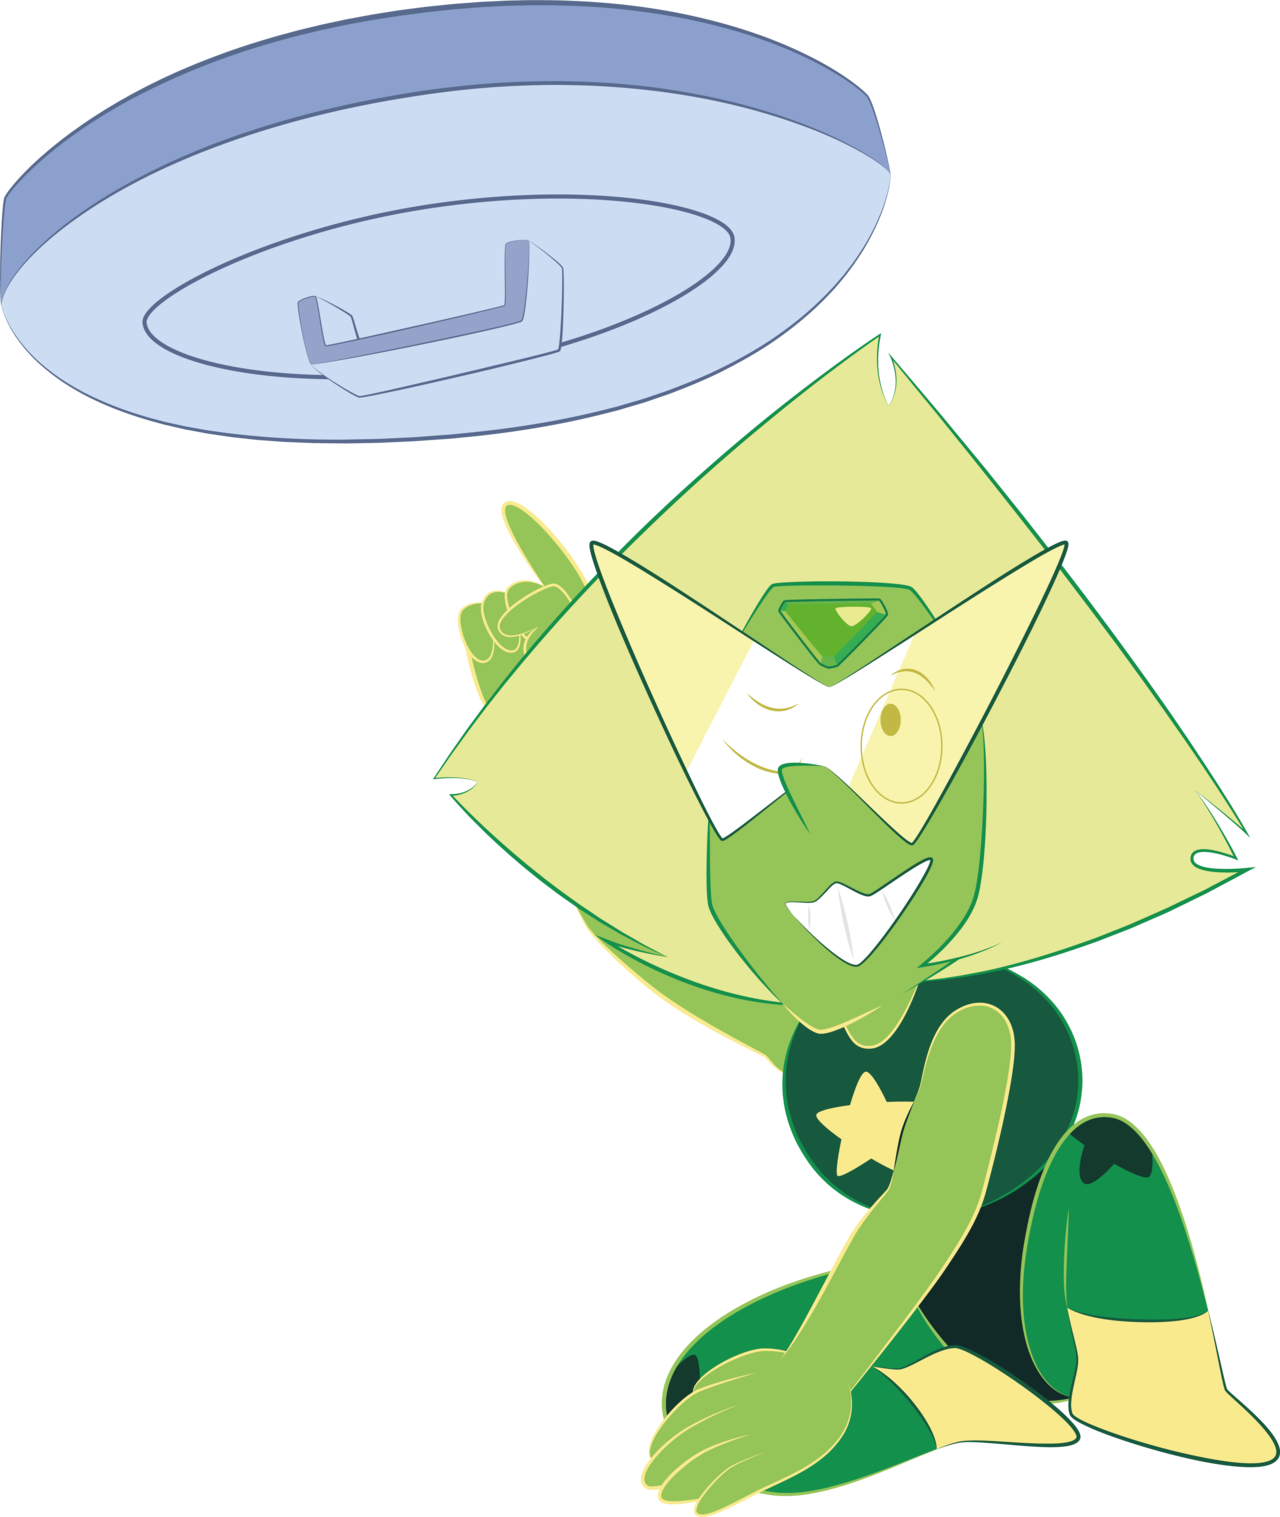 Continuing with the project with Peri All the new Crystal Gems outfit P.s. That trash can lid isn’t there for a random reason (I hope I wrote it right 🤔)